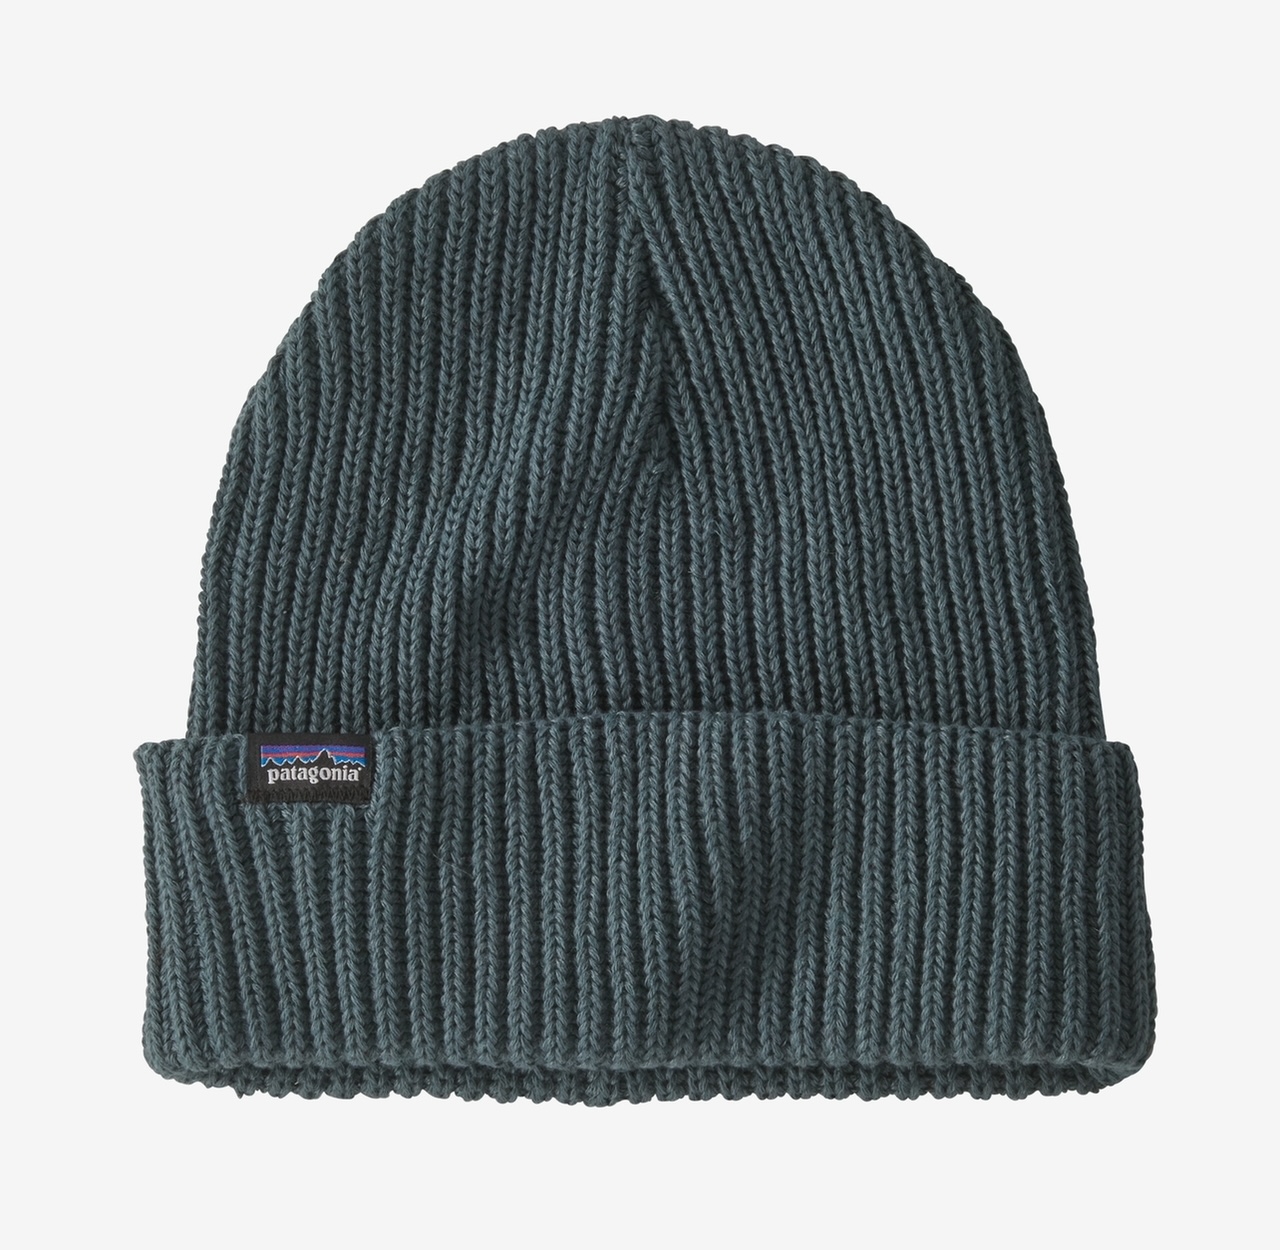 Patagonia Fisherman's Rolled Beanie - Nouveau Green